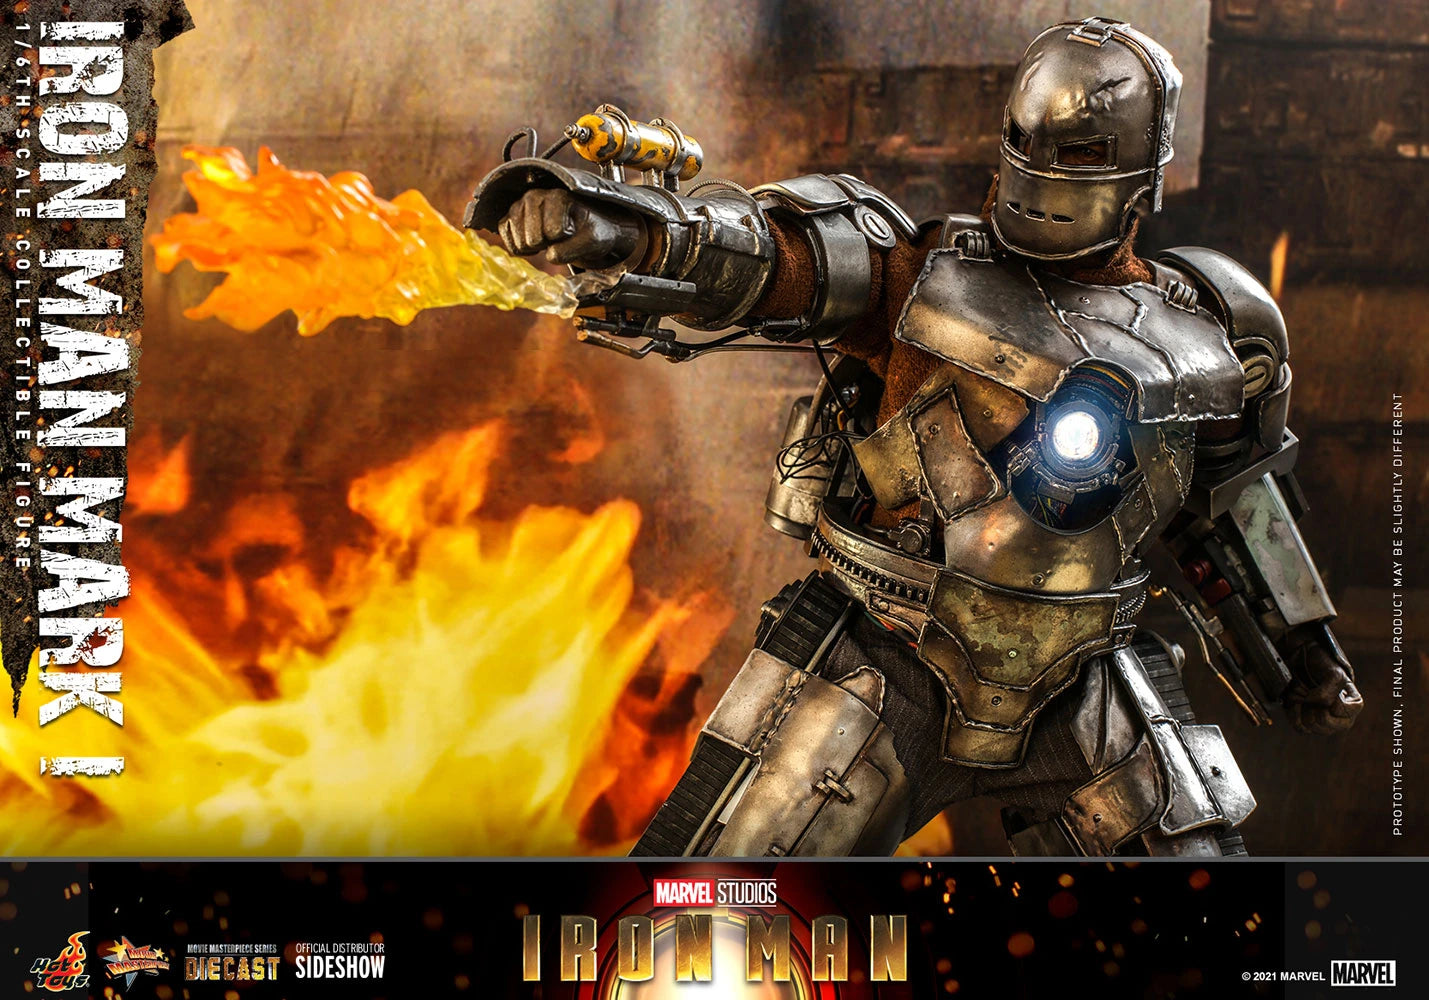 IRON MAN MARK I Sixth Scale Figure By Hot Toys